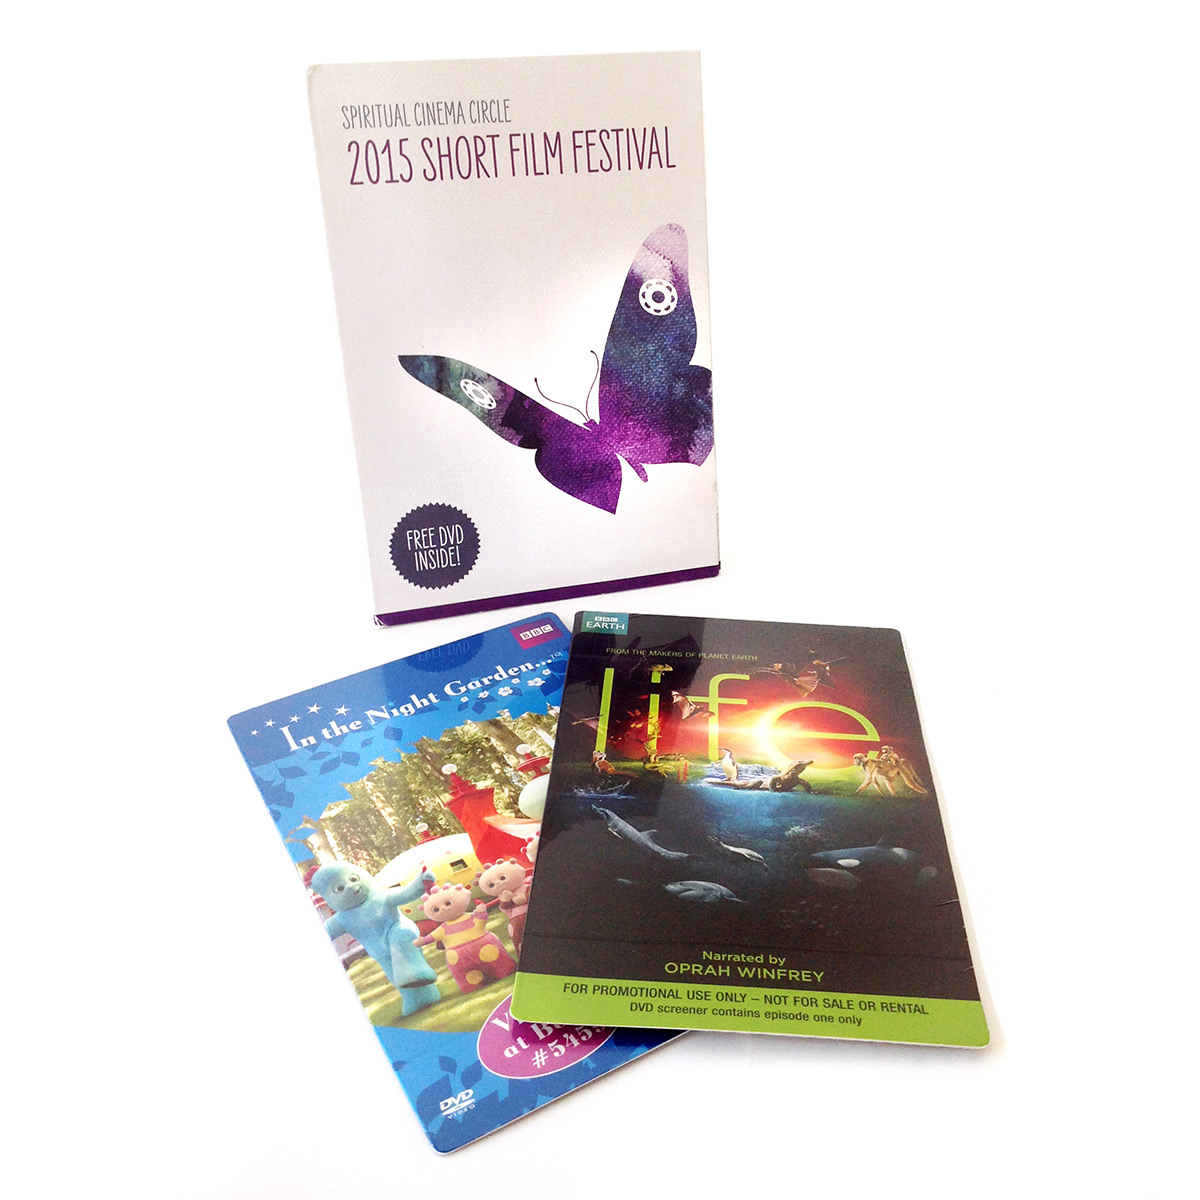 Printed Cardboard - DVD Replication Services Providers